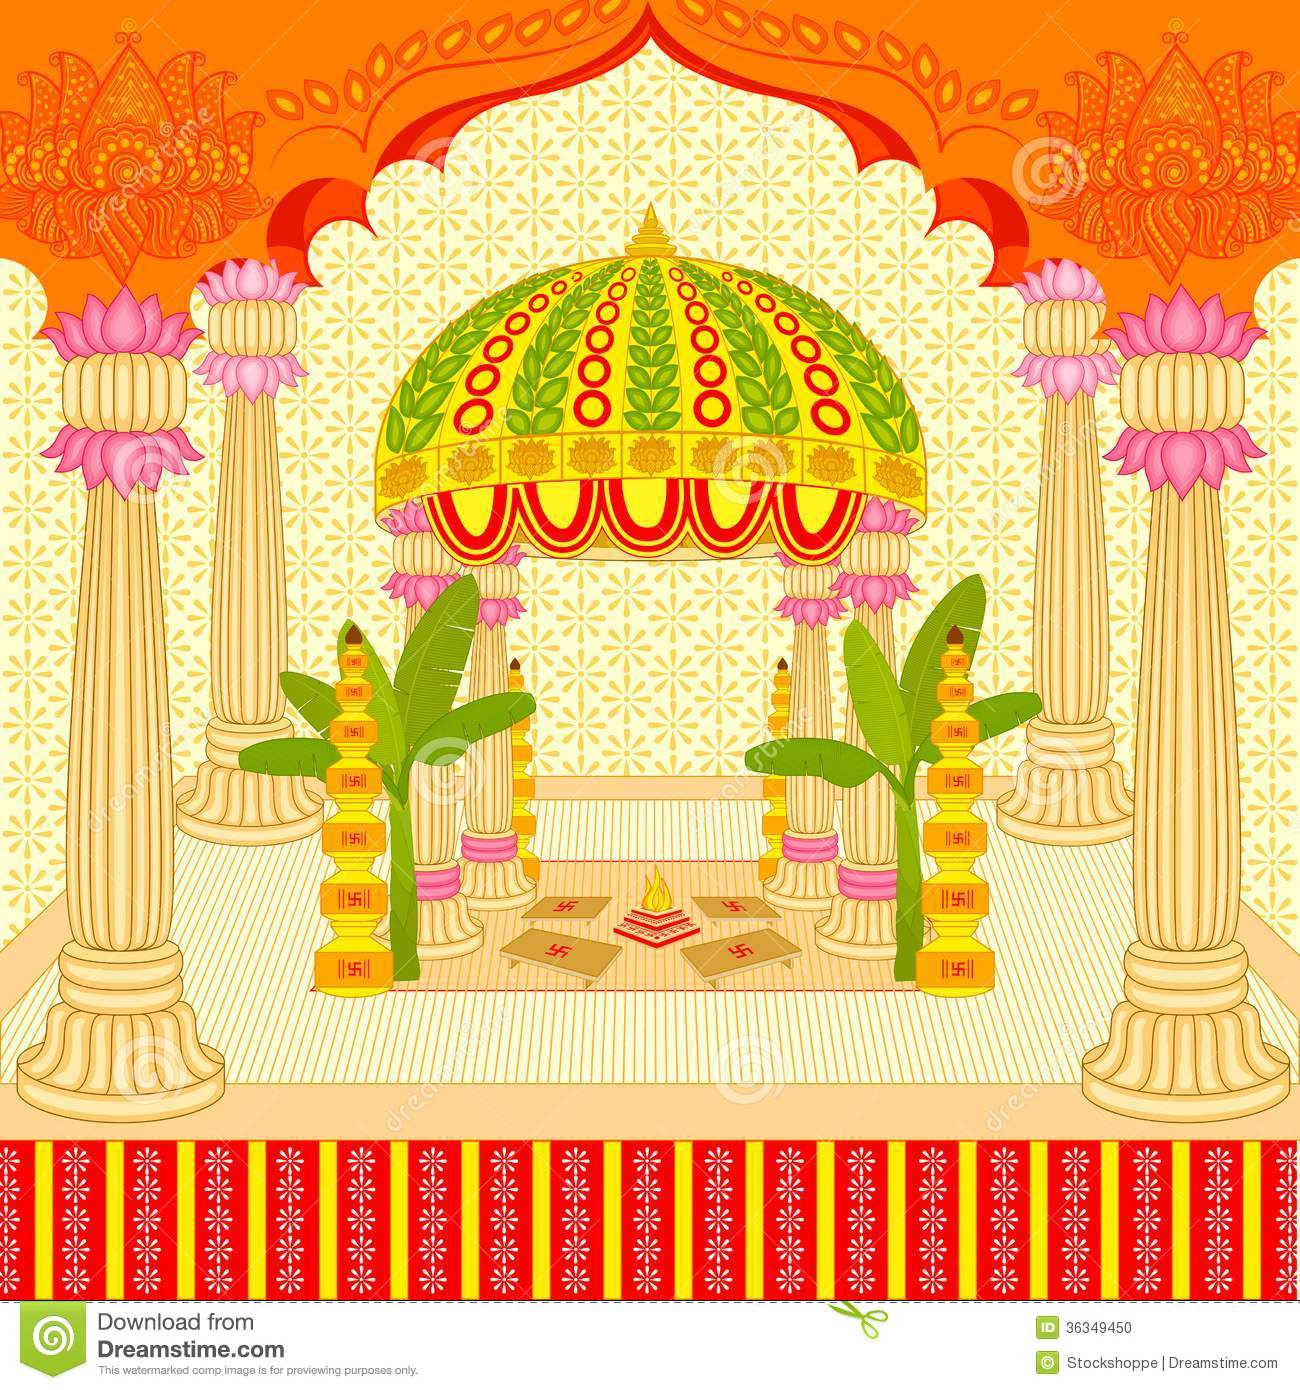 Indian wedding clipart vector free download